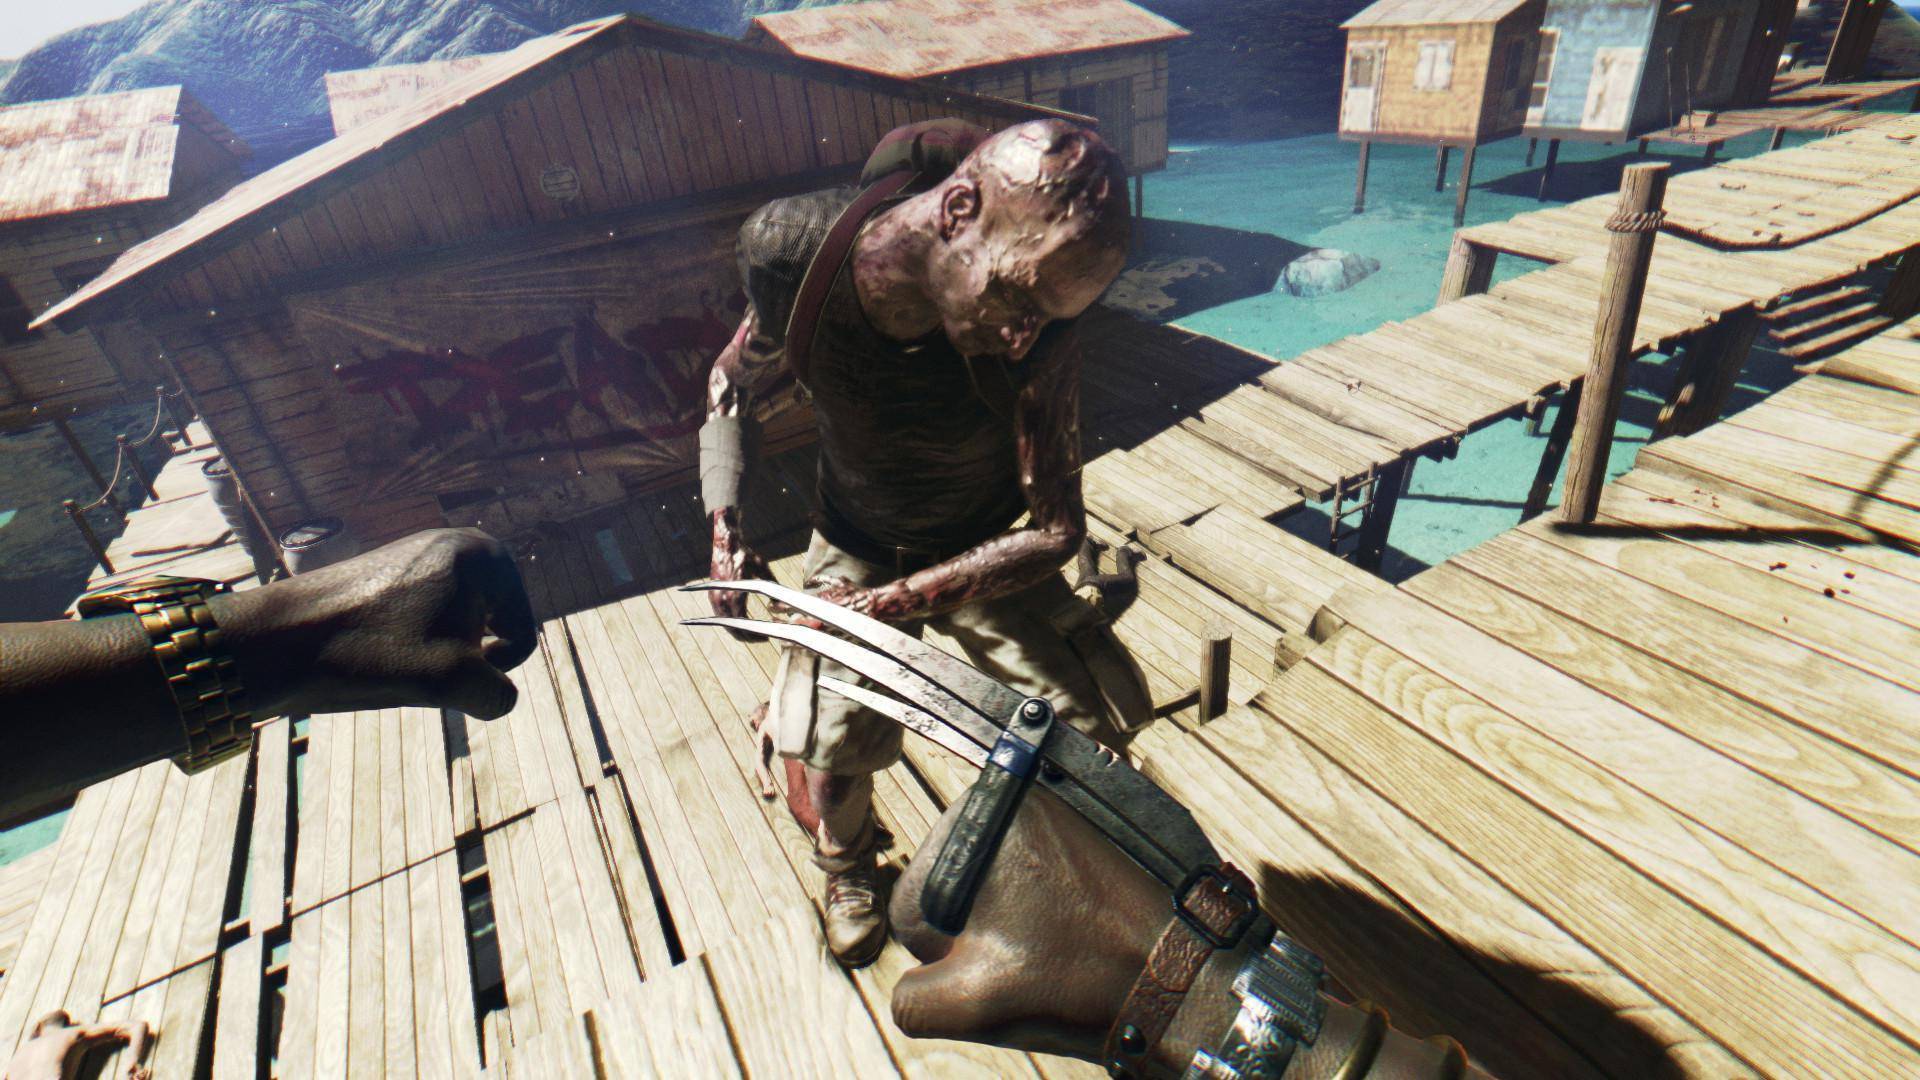 dead island 2 for xbox one